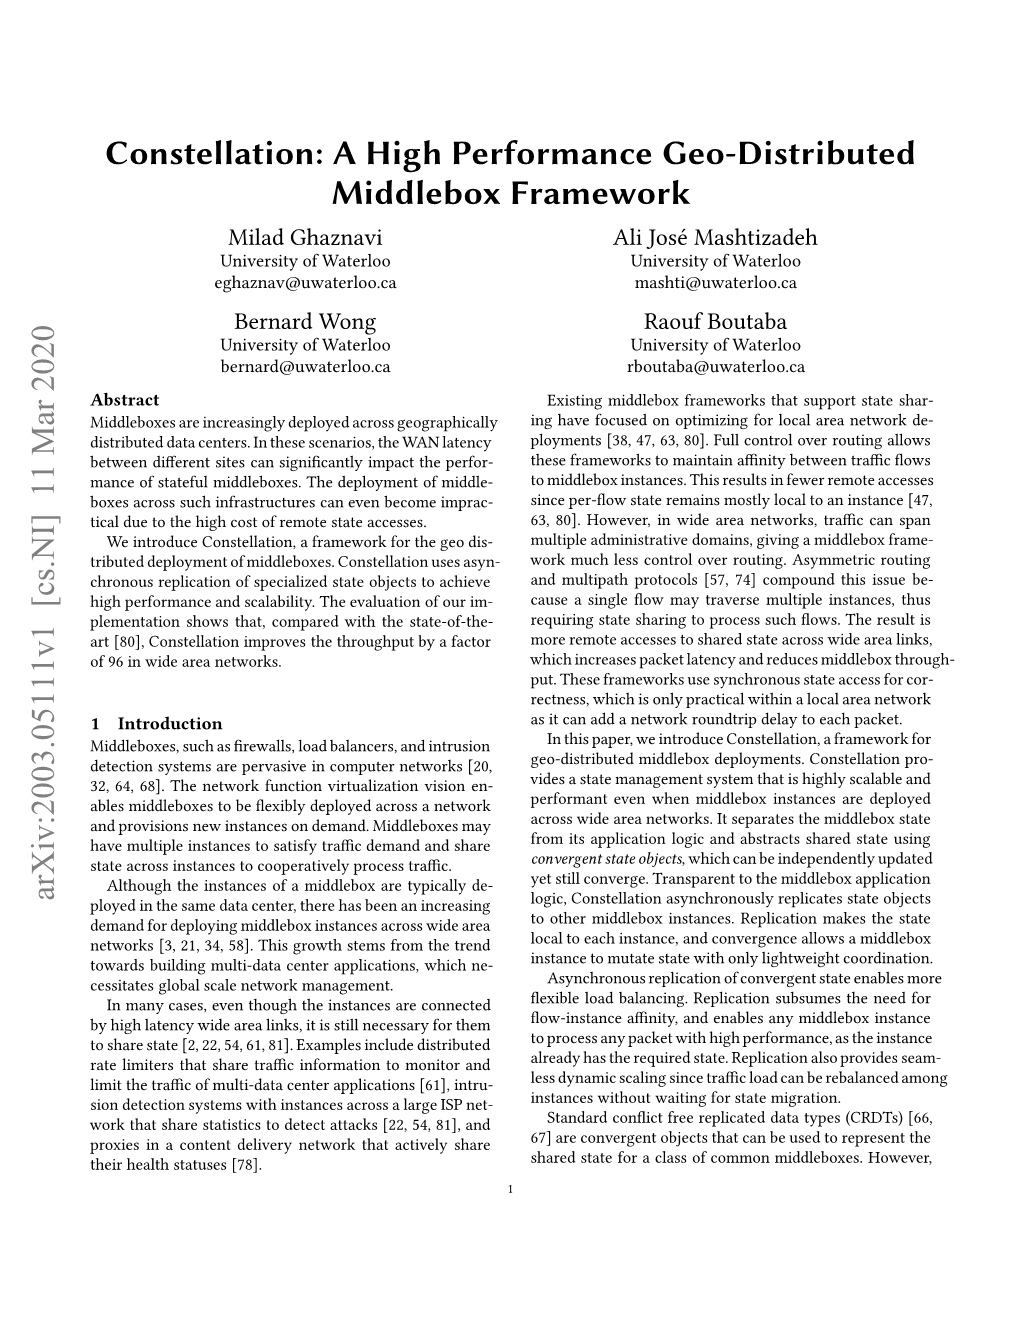 A High Performance Geo-Distributed Middlebox Framework SubmiEd for Review to SIGCOMM, 2020